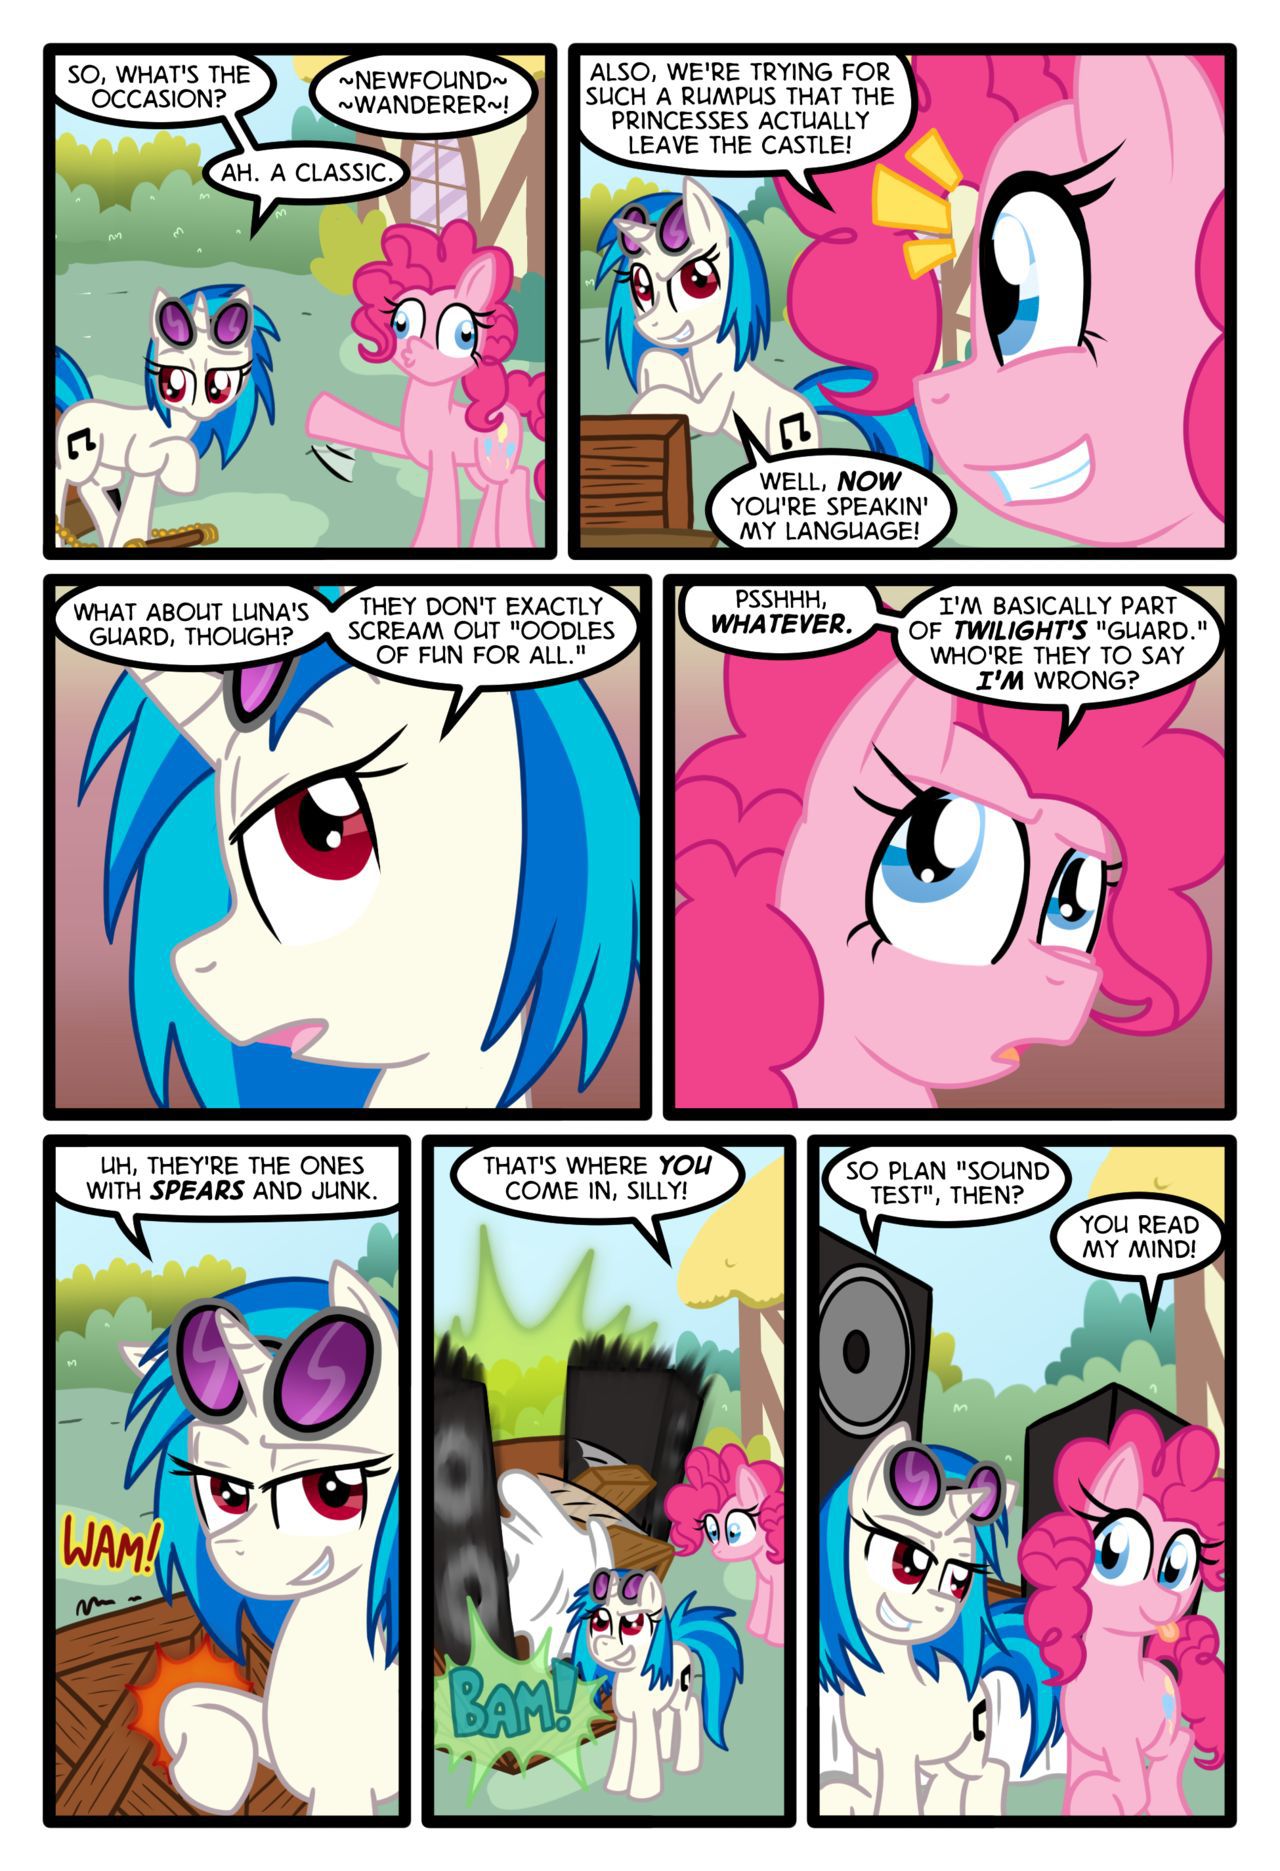 [Zaron] Lonely Hooves (My Little Pony Friendship Is Magic) [Ongoing] 43